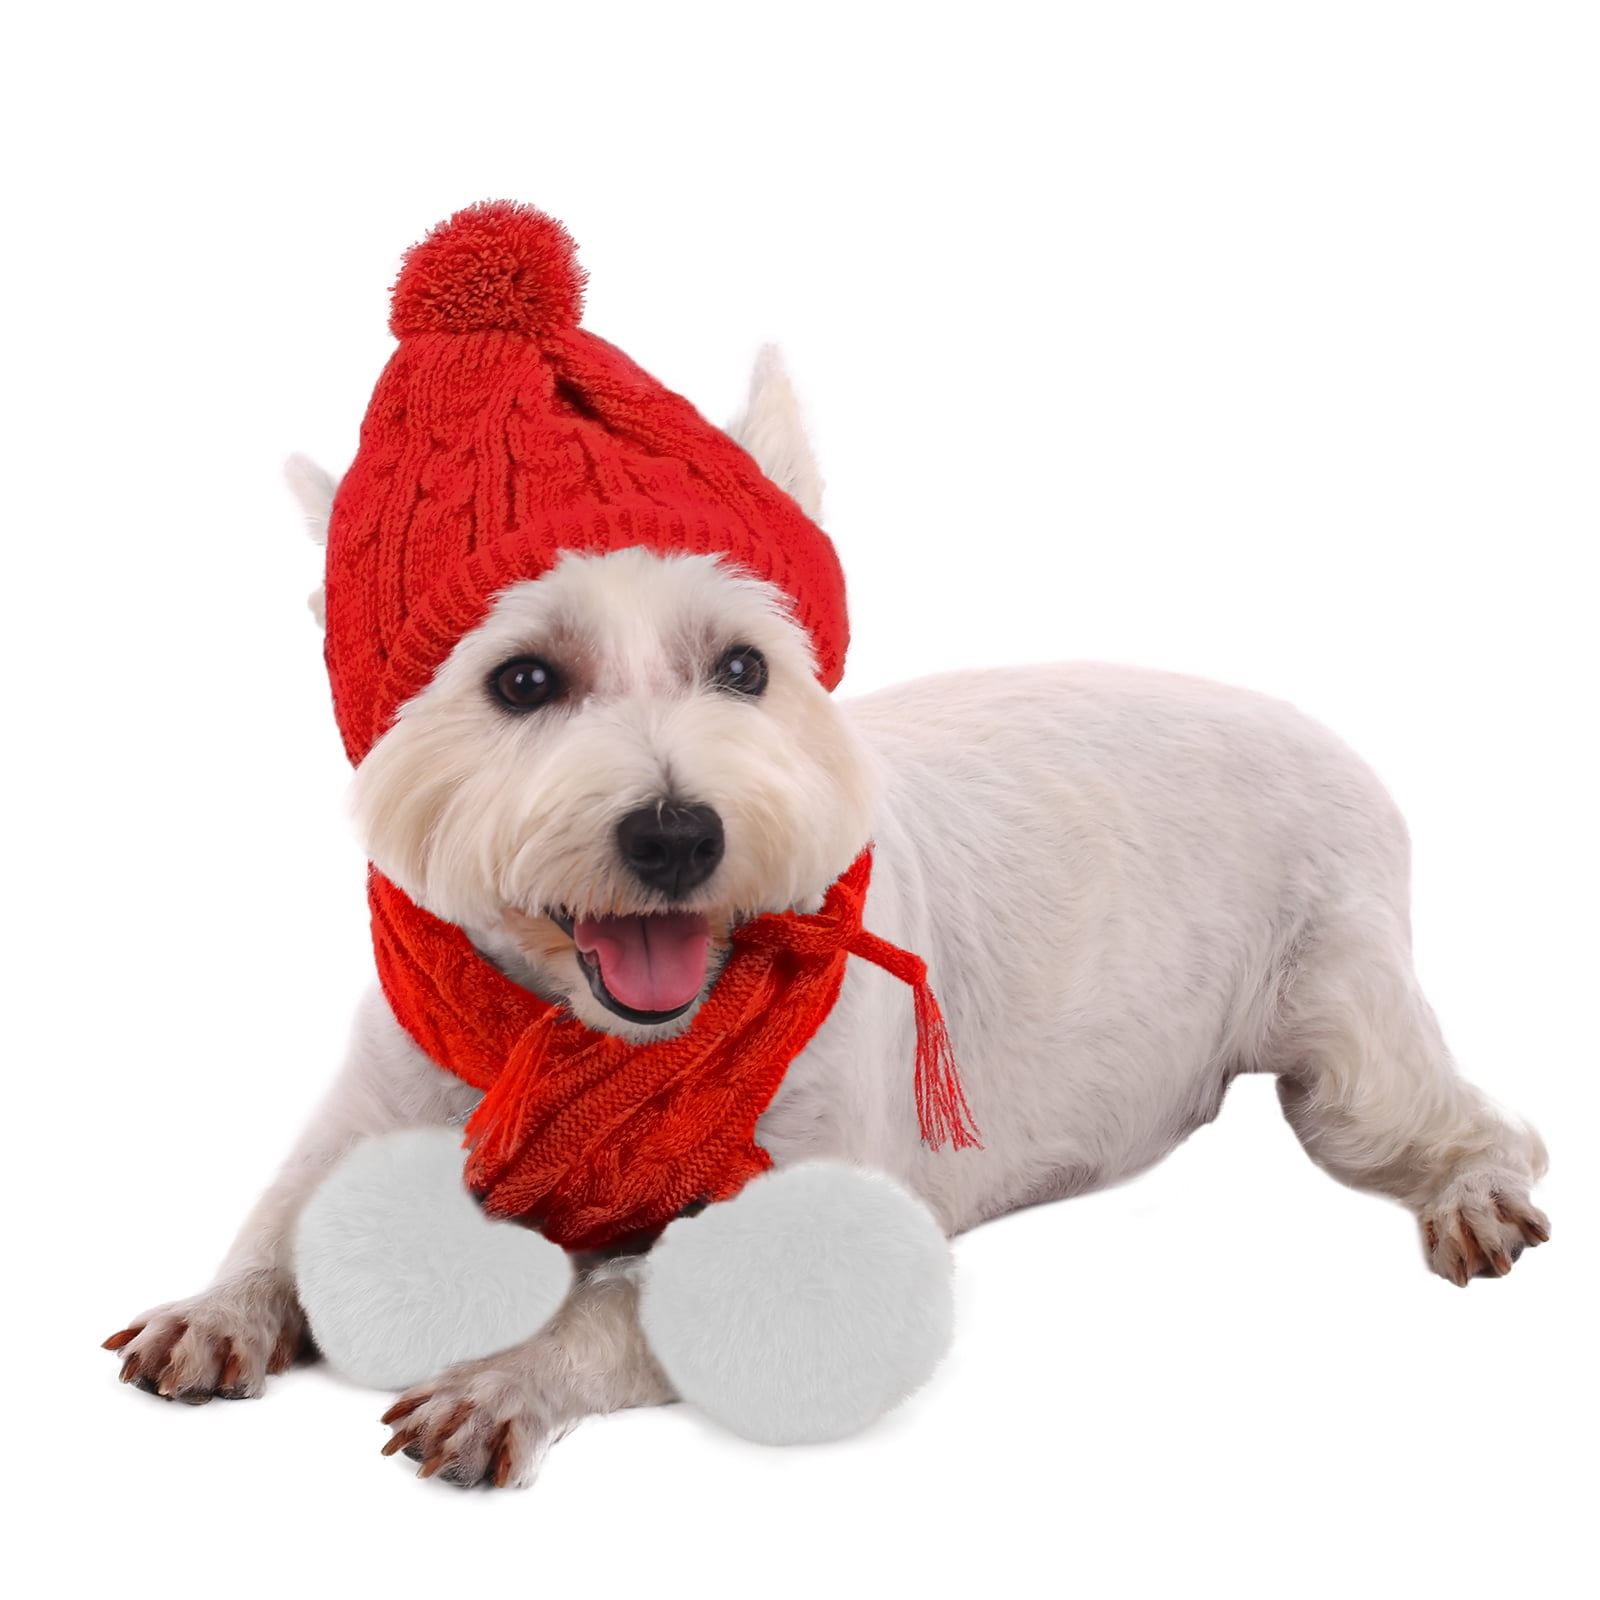 IDOMIK Dog Hat and Scarf Set Warm Knitting Hat with Ear Holes & Pom Pom Pup Scarf for Cold Weather Winter Head Neck Warmer Christmas Cozy Pet Costume Accessorry for Small Medium Large Dog/Pappy/Cat 